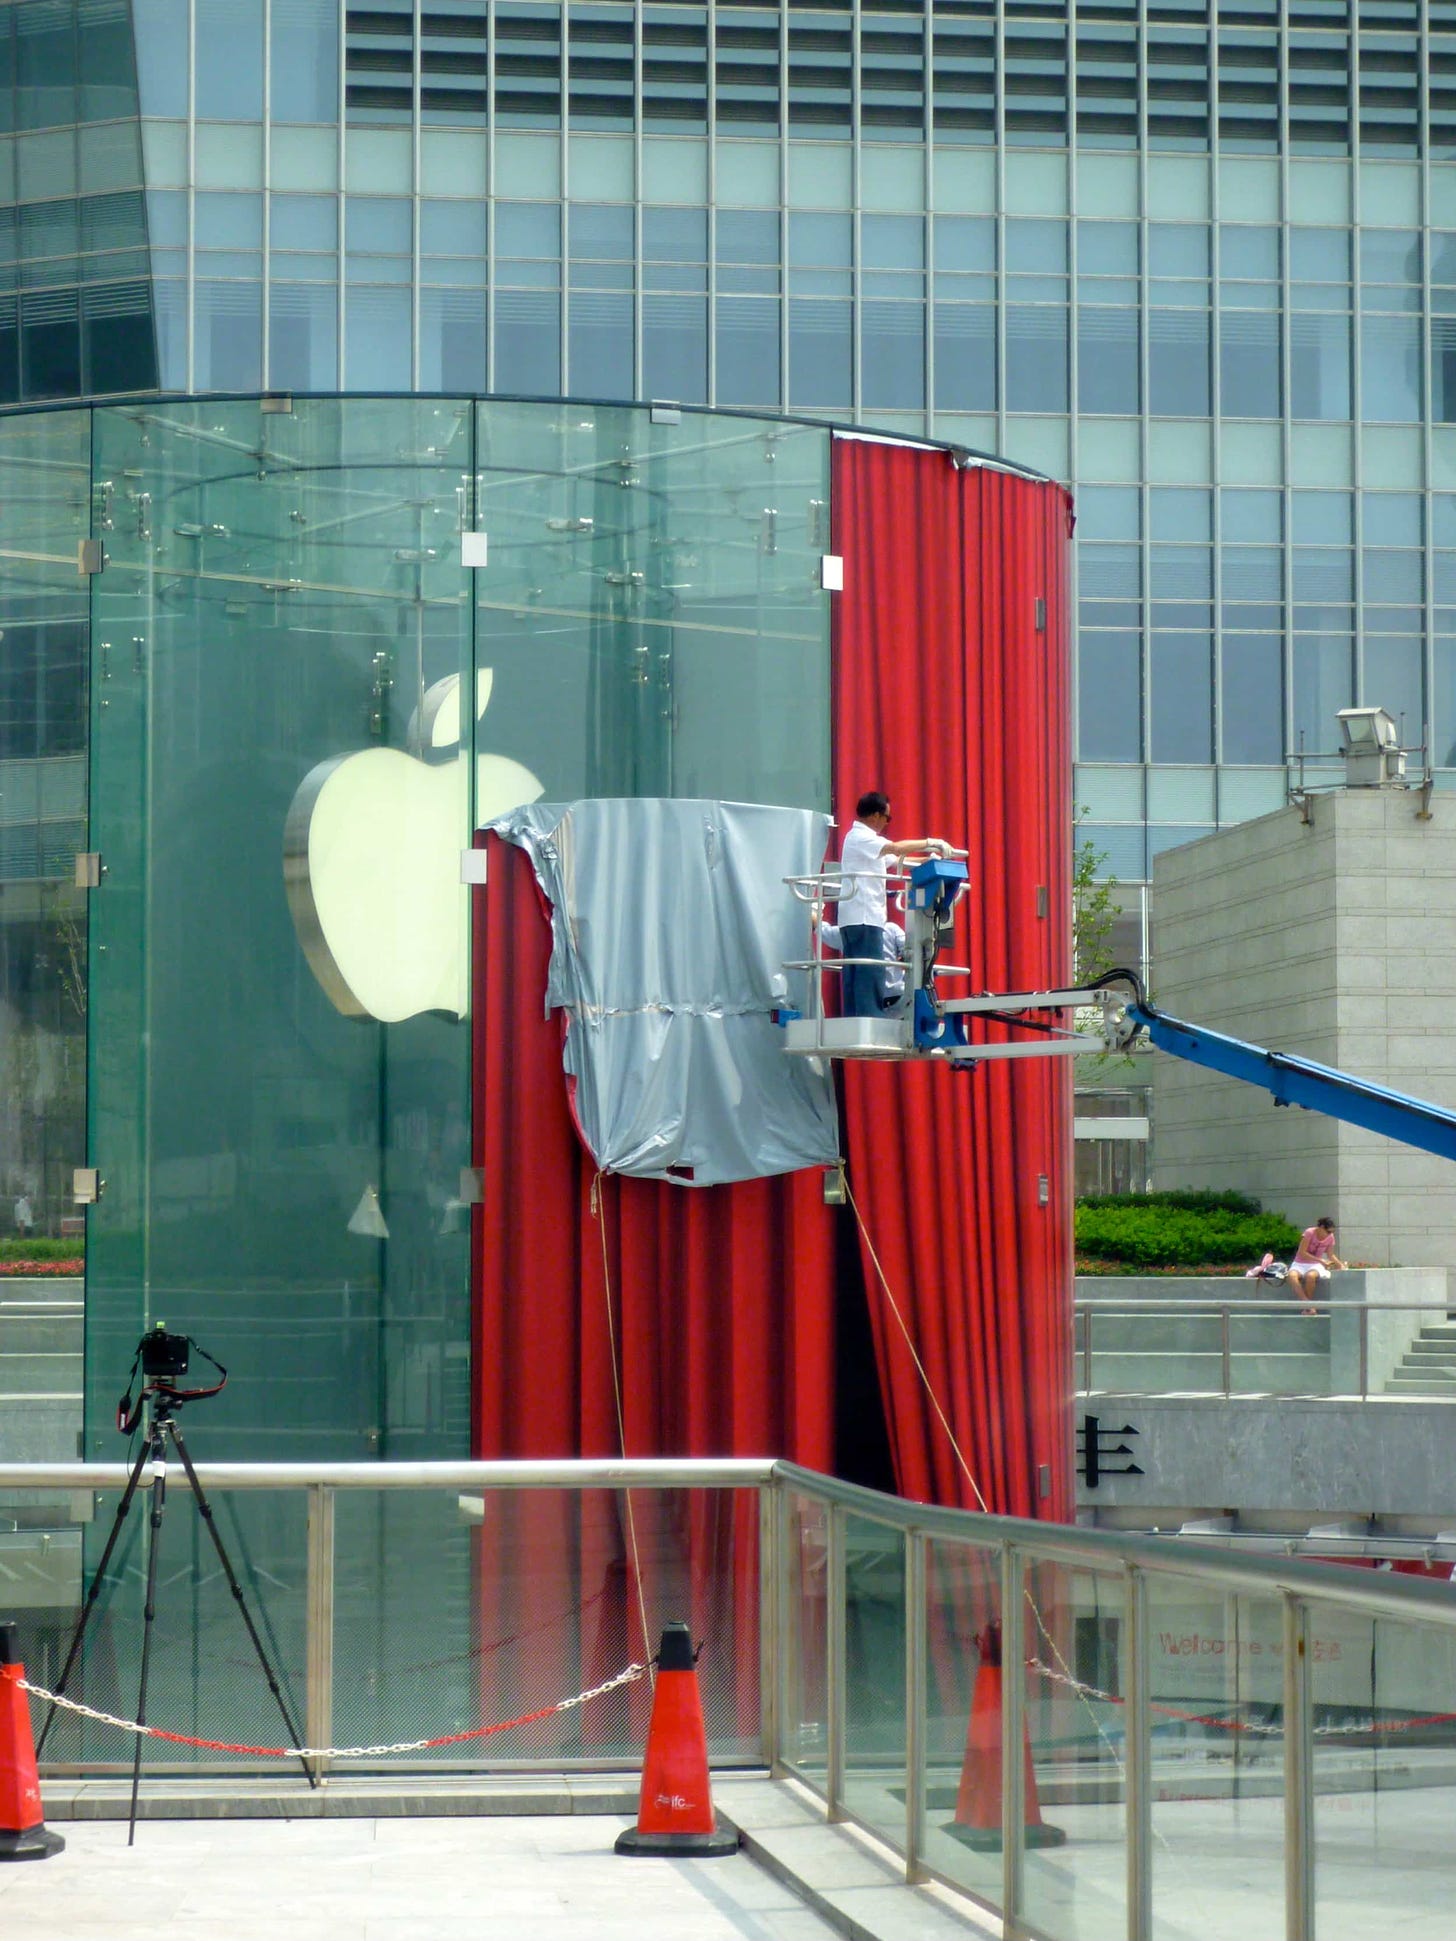 Apple Pudong close-up and being unwrapped shortly before opening in 2010. The vinyl covering the store has the appearance of a red stage curtain.